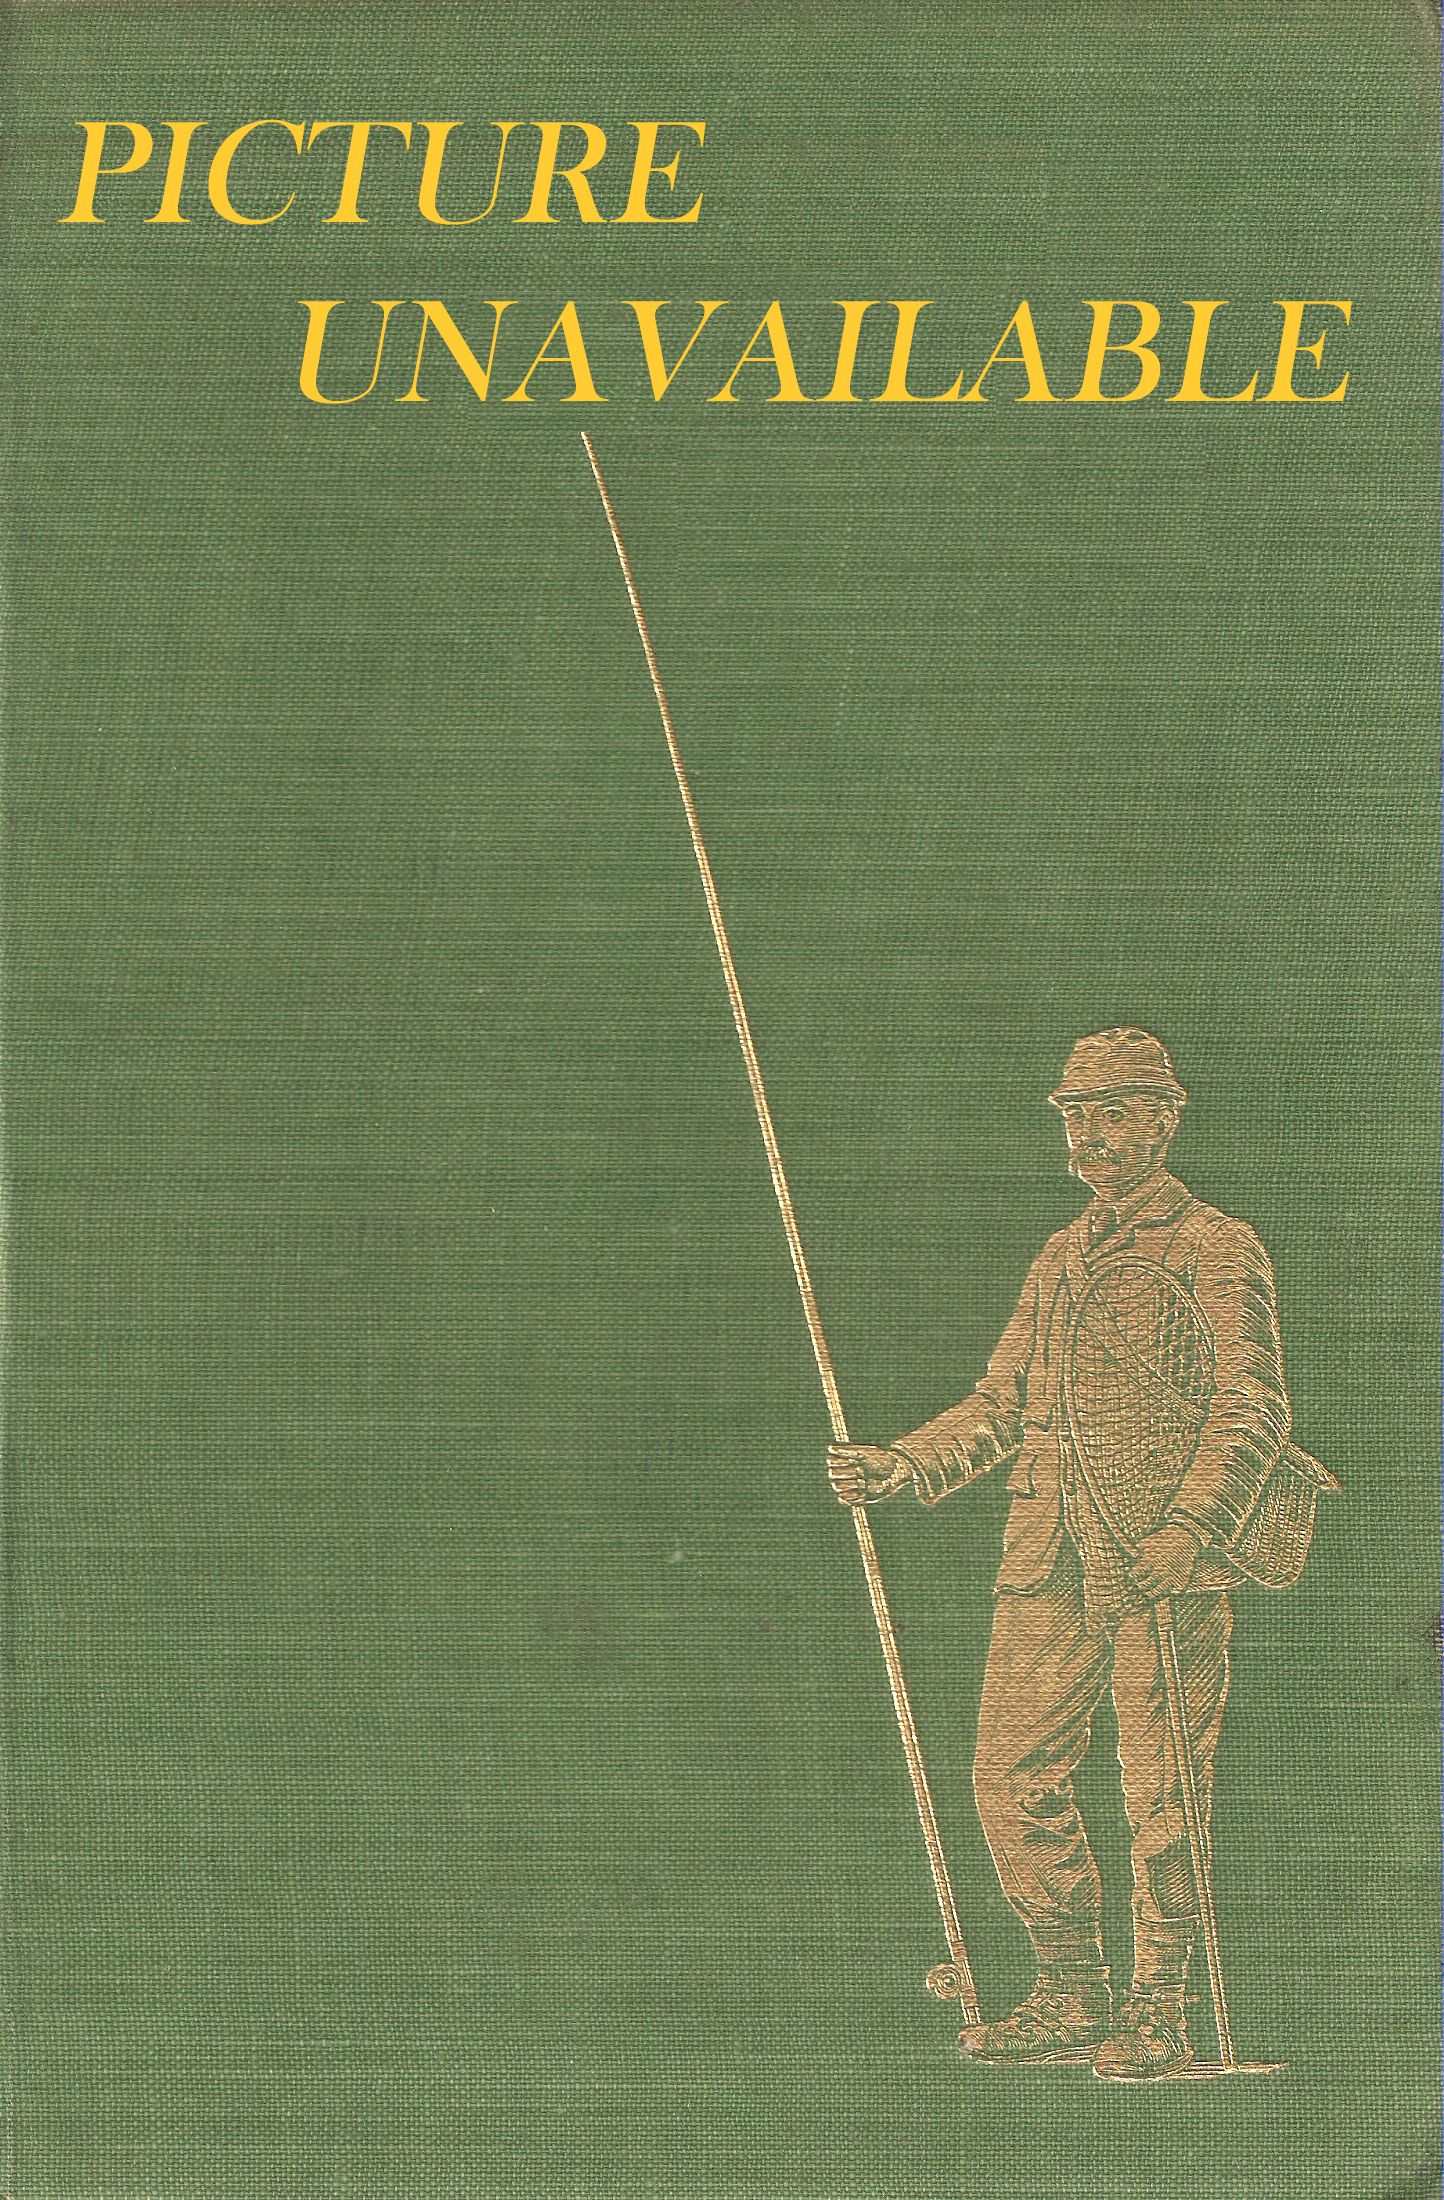 MIRROR OF ANGLING. Vol. II. By E. Marshall-Hardy. (in dust-wrapper of THE  WRIST MARK by J.S. Fletcher).